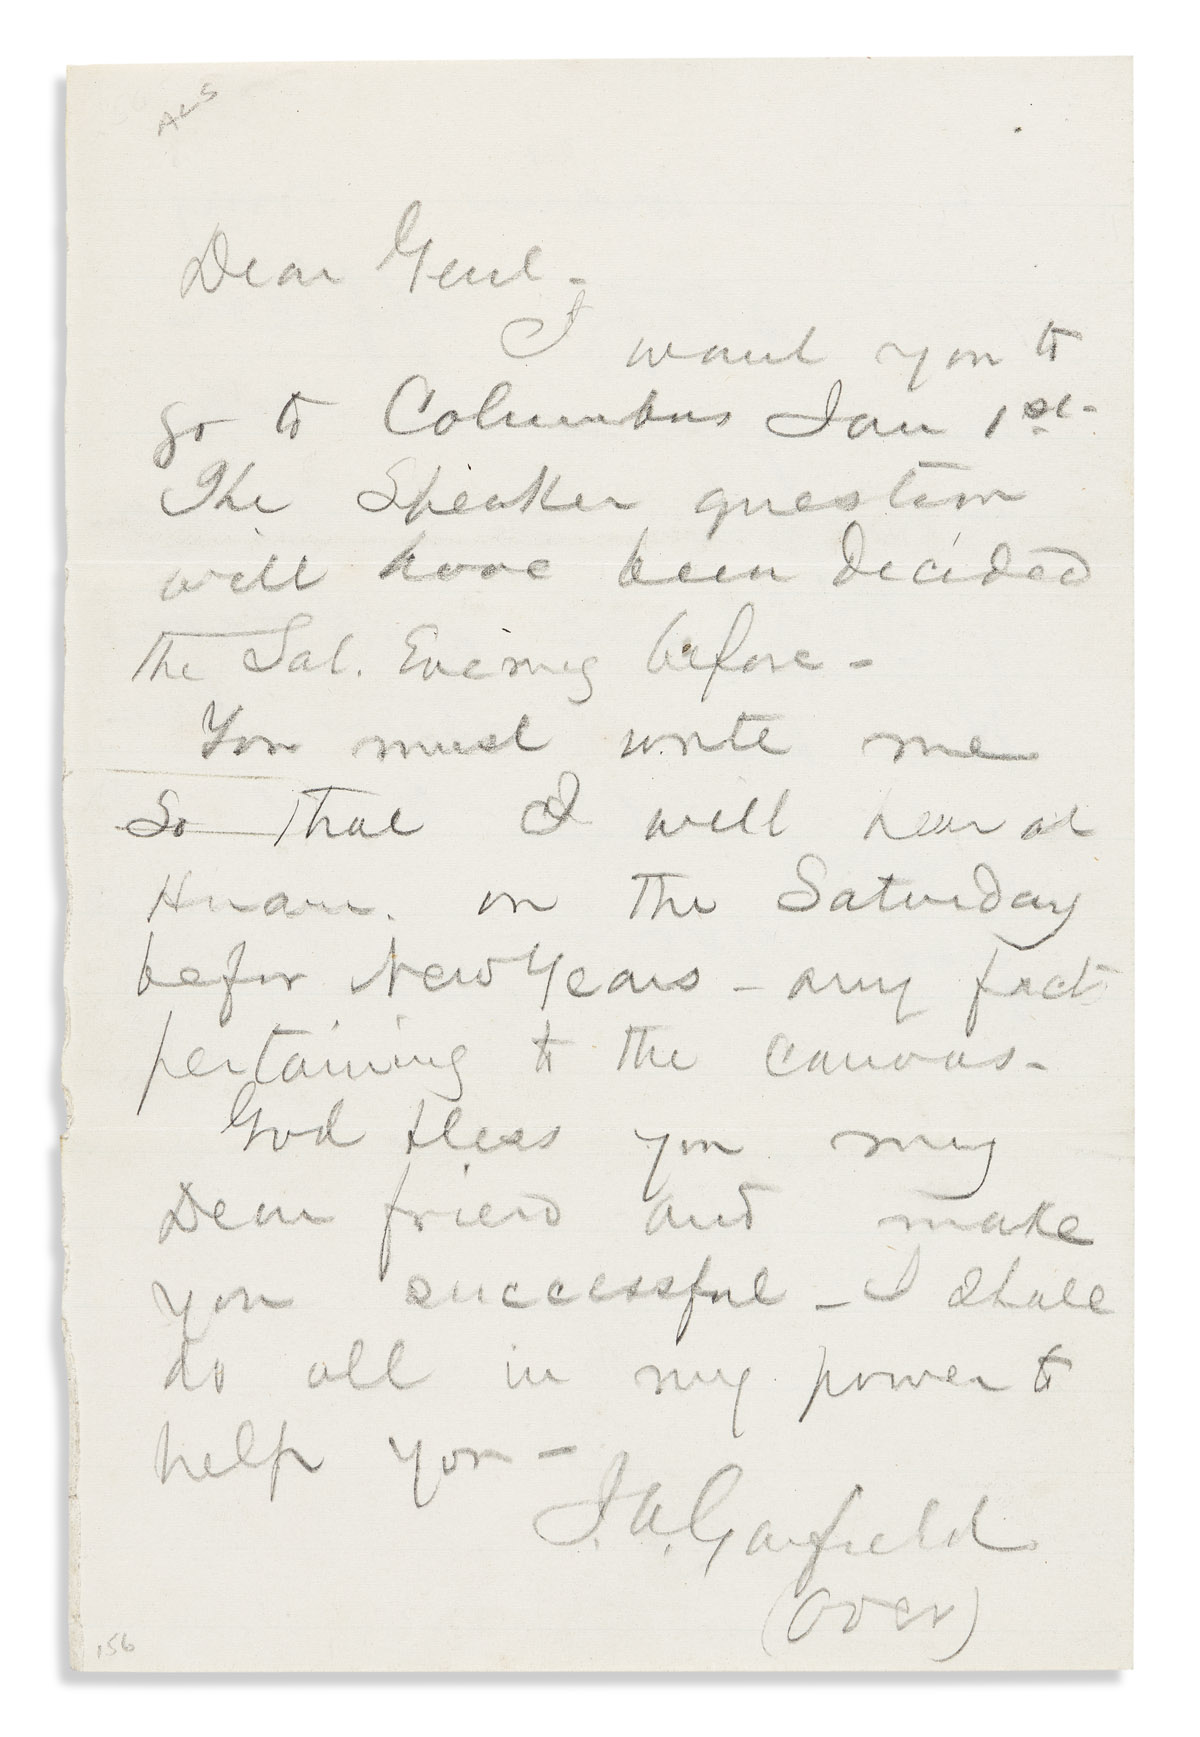 GARFIELD, JAMES A. Autograph Letter Signed, twice (J.A. Garfield or J.A.G.), to Dear Genl, in pencil,